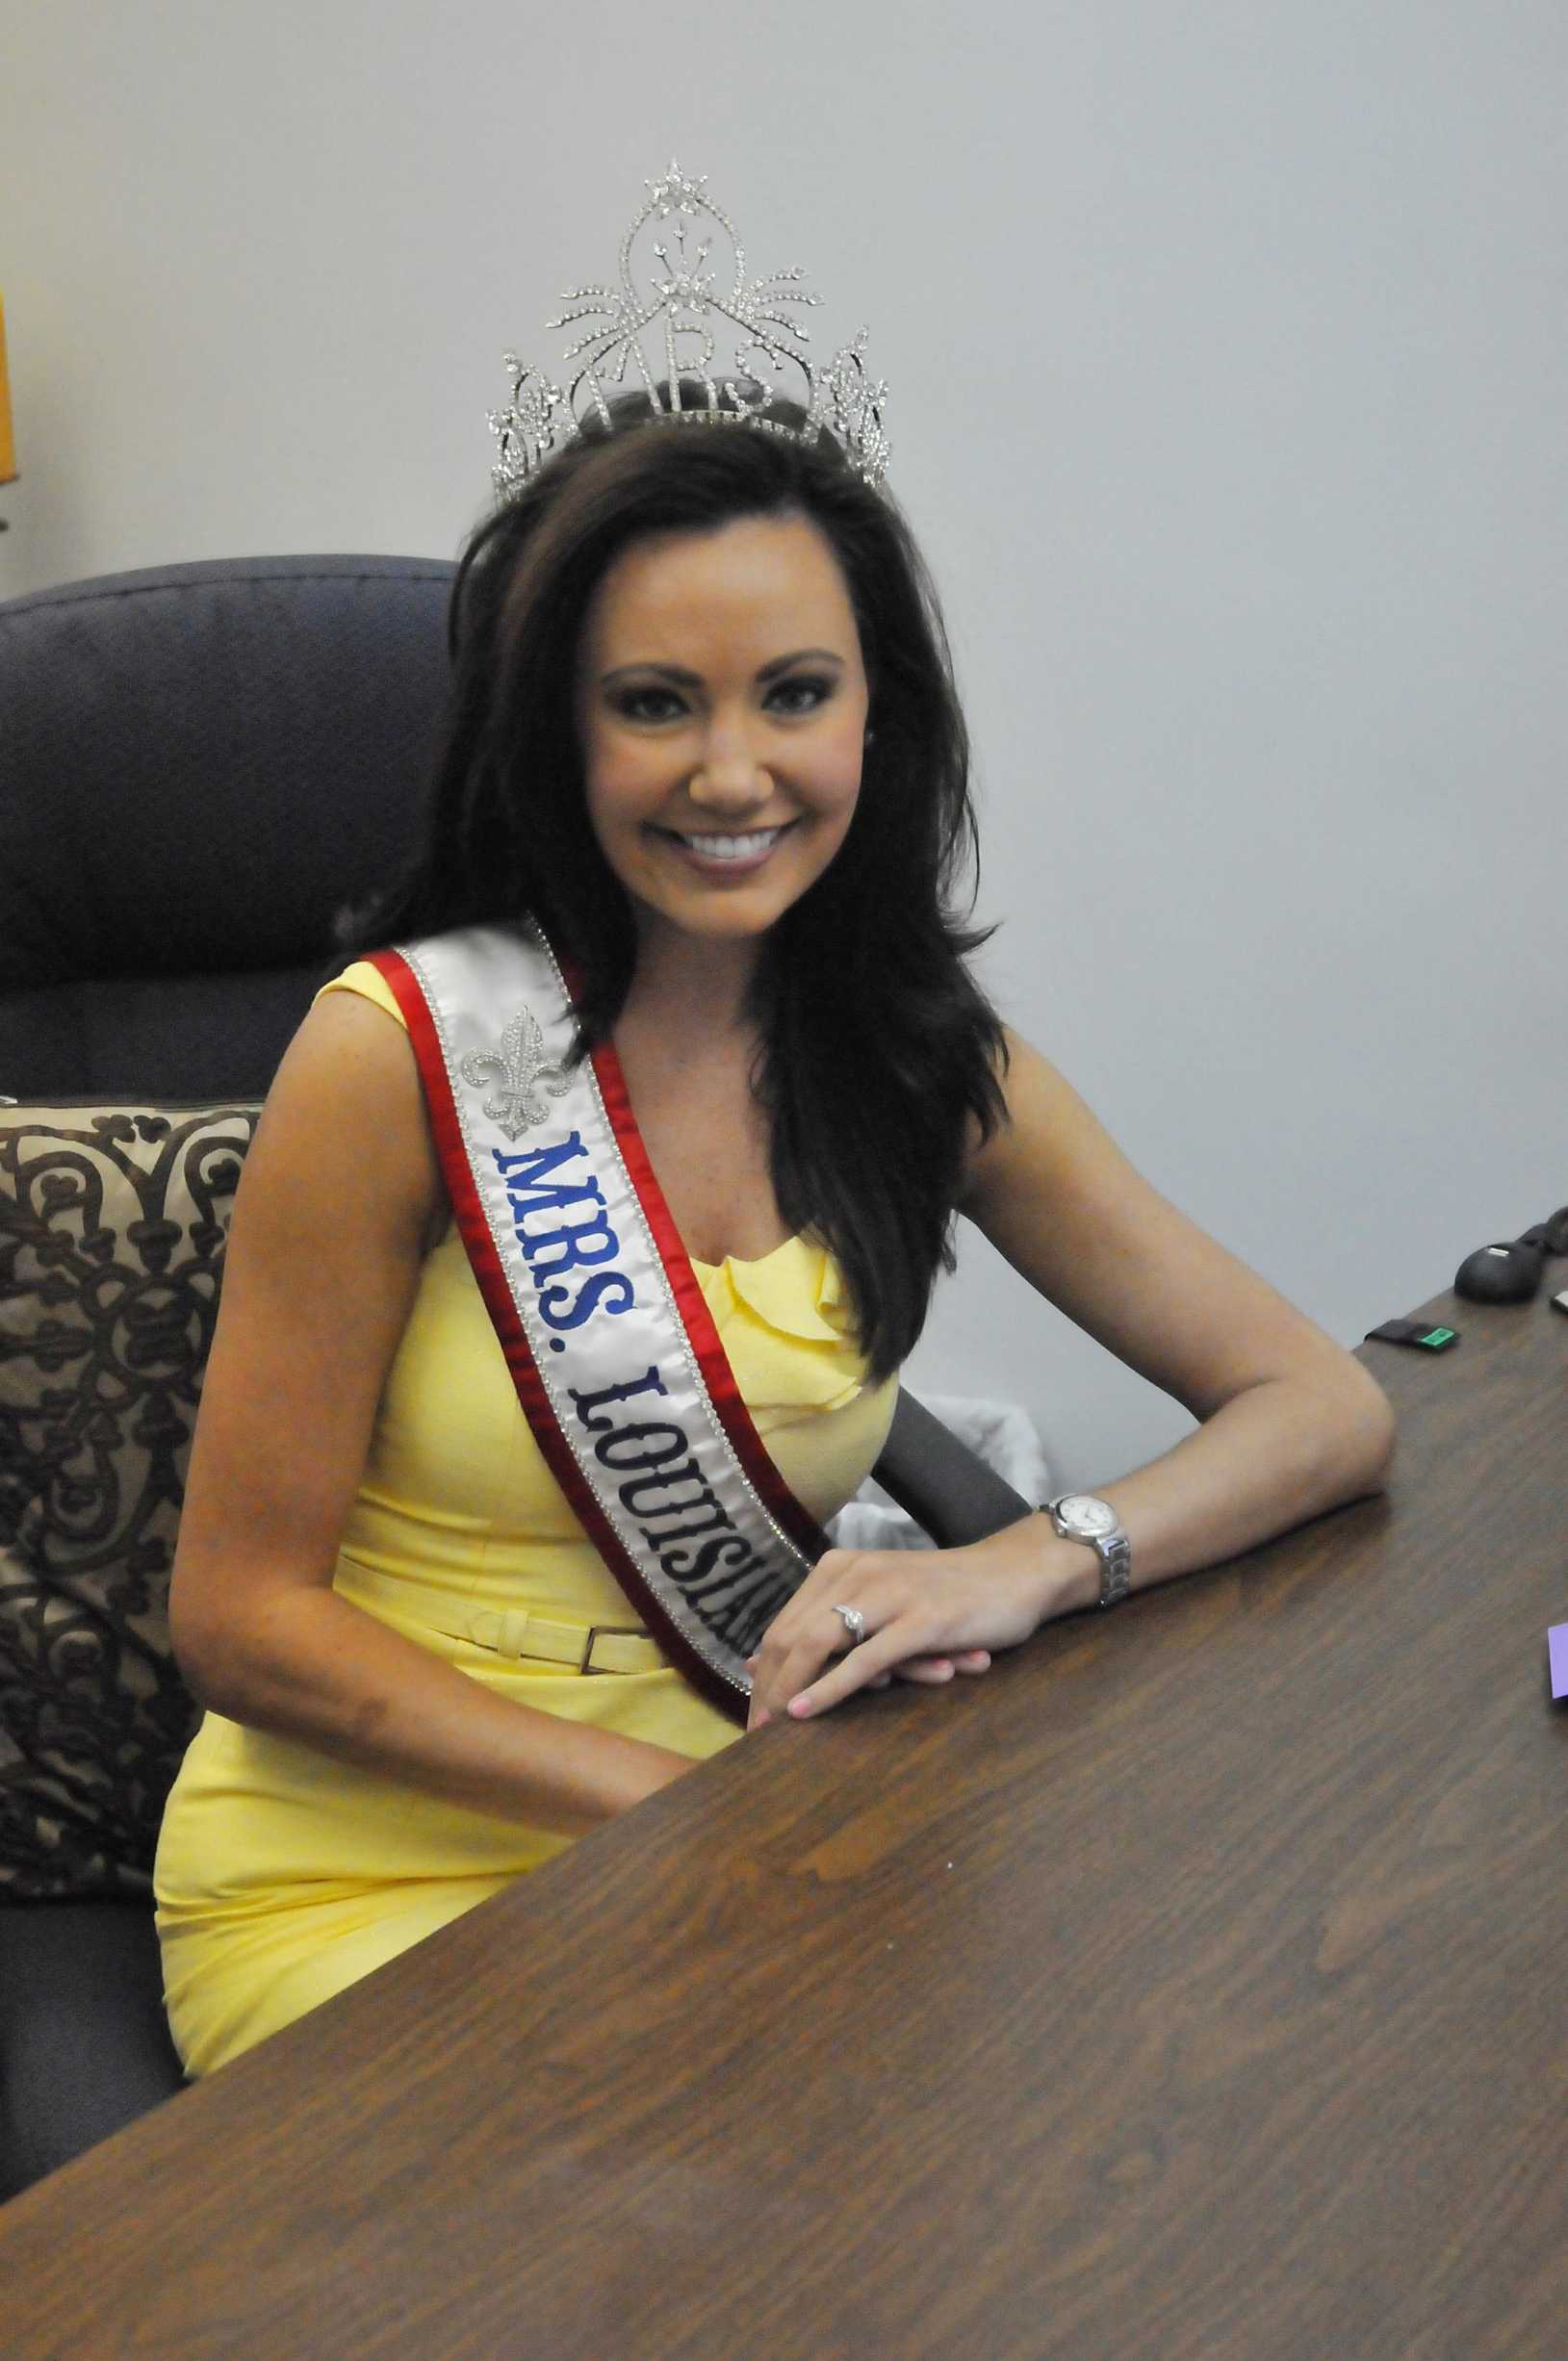 Instructor competes in Mrs. USA pageant – the nicholls worth